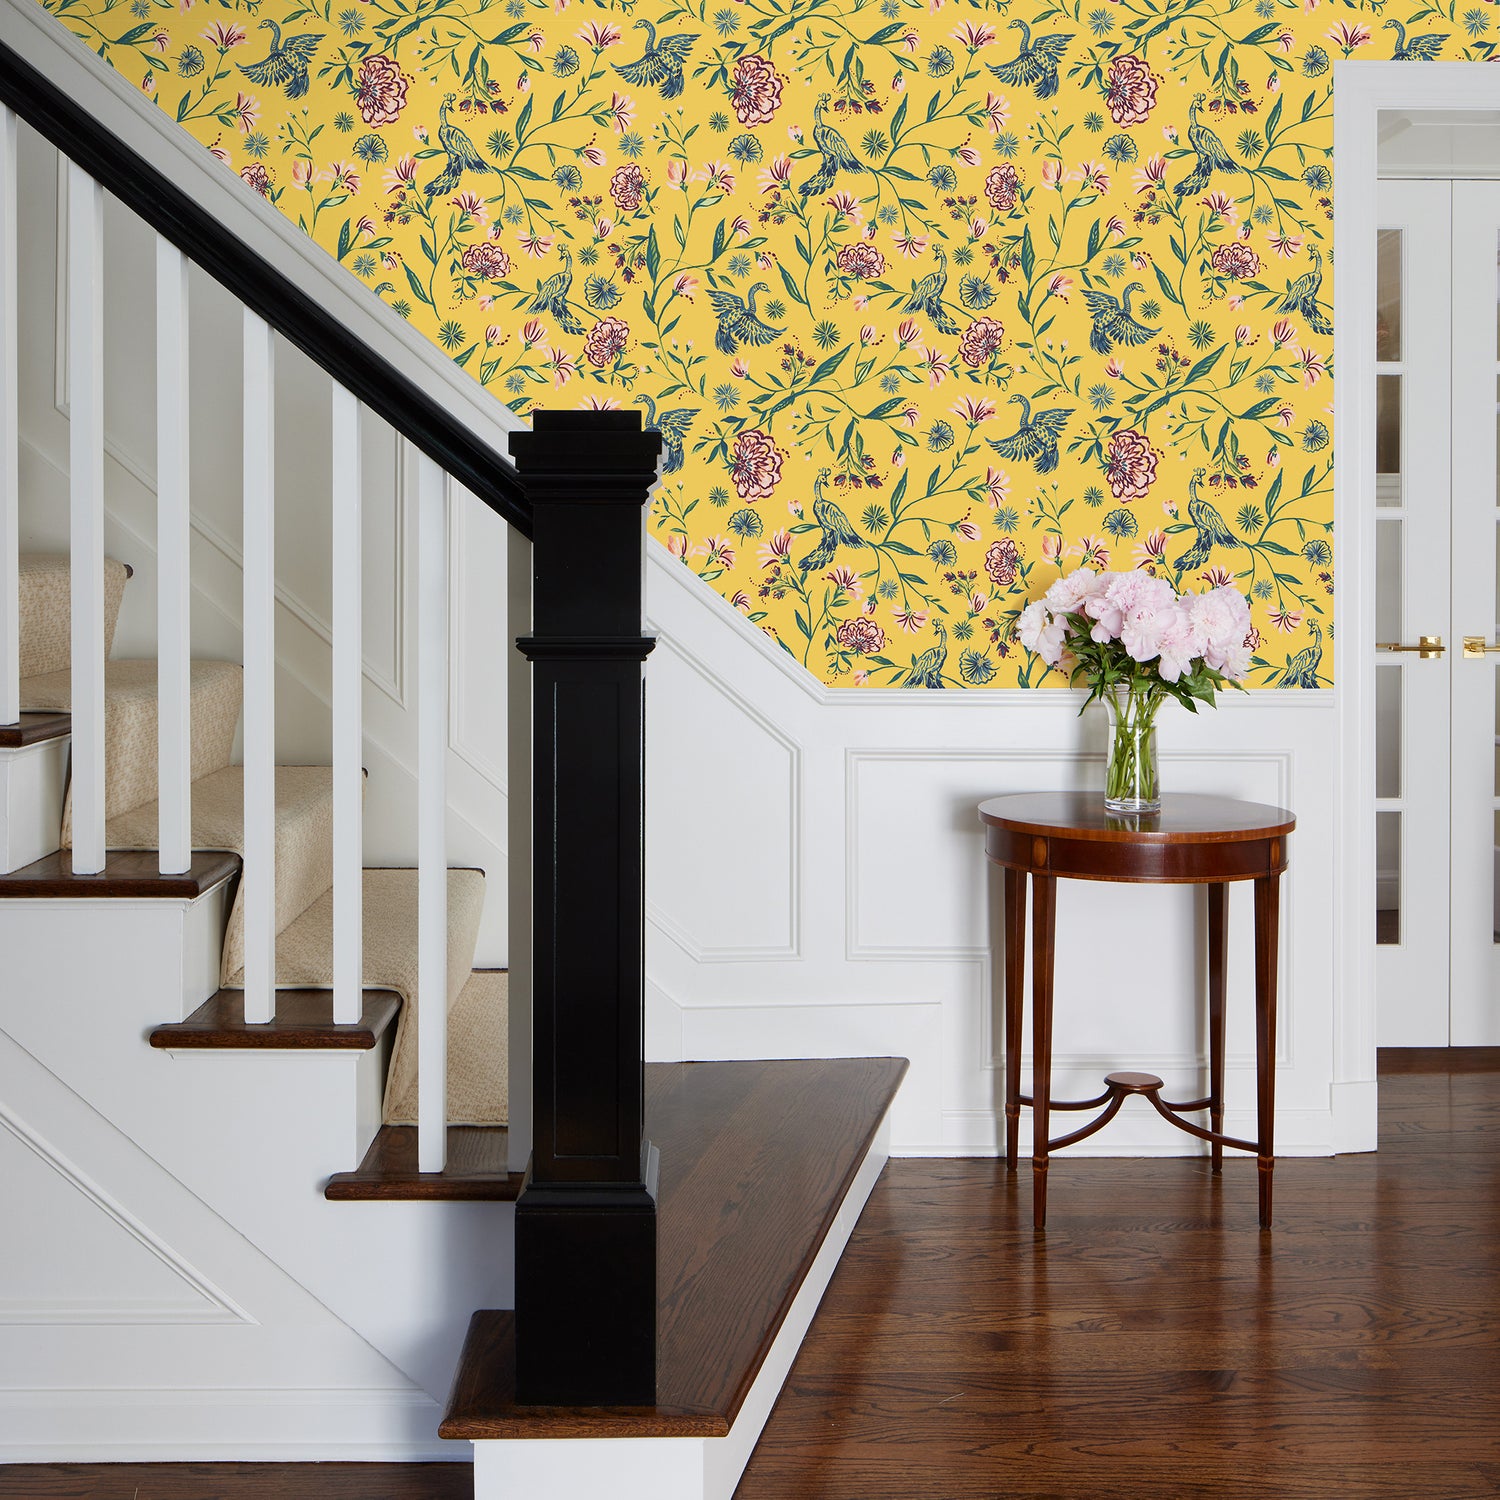 Stairs styled with Yellow Canary printed wallpaper and wooden small table in front with vase full of pink flowers on top